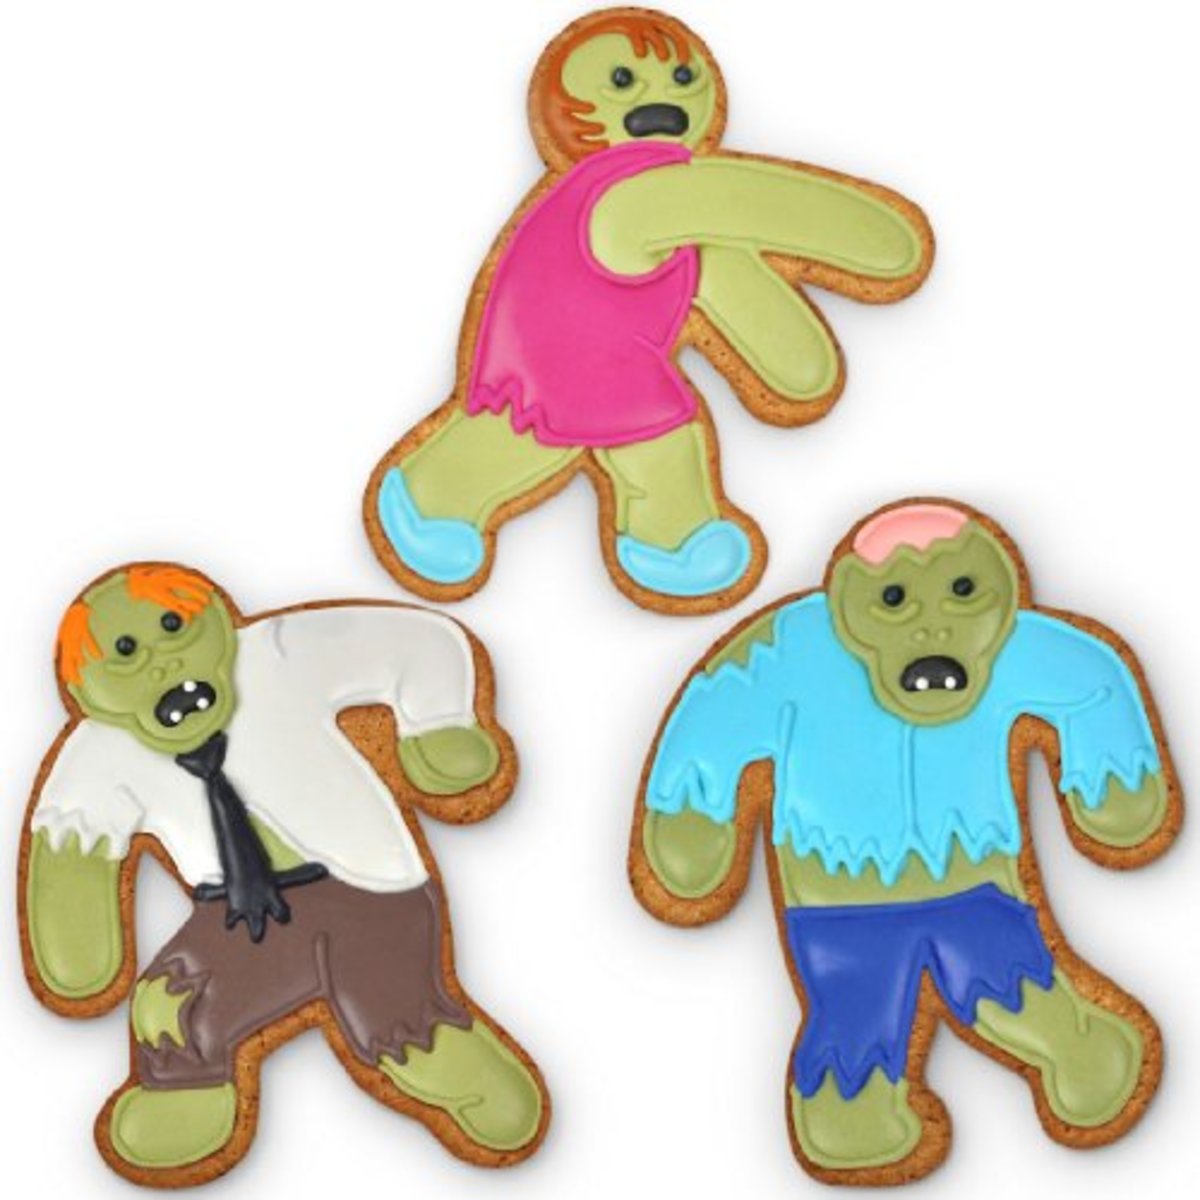 undead-fred-zombie-shaped-cookie-cutters-novelty-kitchen-bakeware